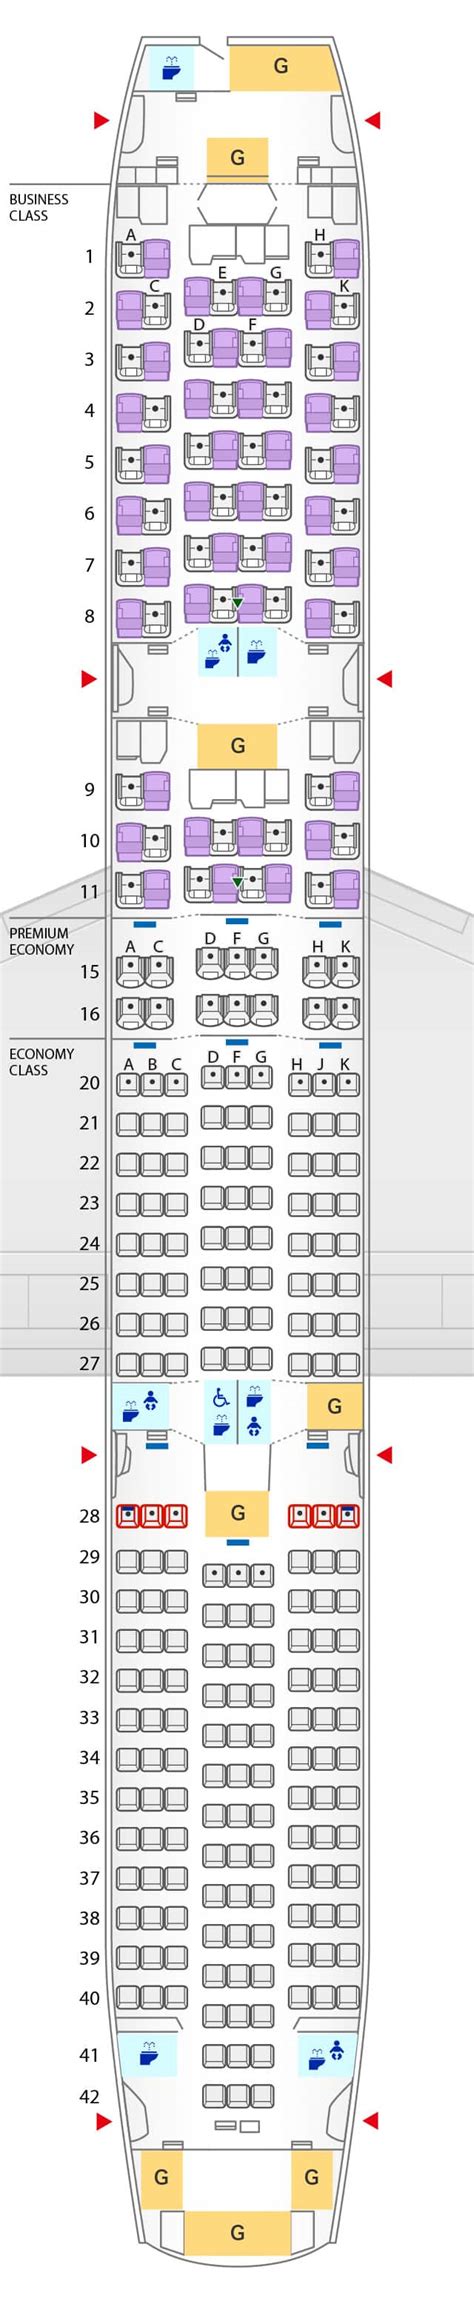 787-9 seat map. Rows 23 to 27 (33 seats) 41 - 42” (104 - 106cm) Economy. Rows 35 to 61 (215 seats) 31 - 33” (78 - 83cm) Economy Skycouch™. Rows 37 to 44 ABC and 36 to 40 HJK. 32 - 33” (81 - 83cm) * Seat pitch - the distance between a point on one seat and the same point on the seat in front of it. 